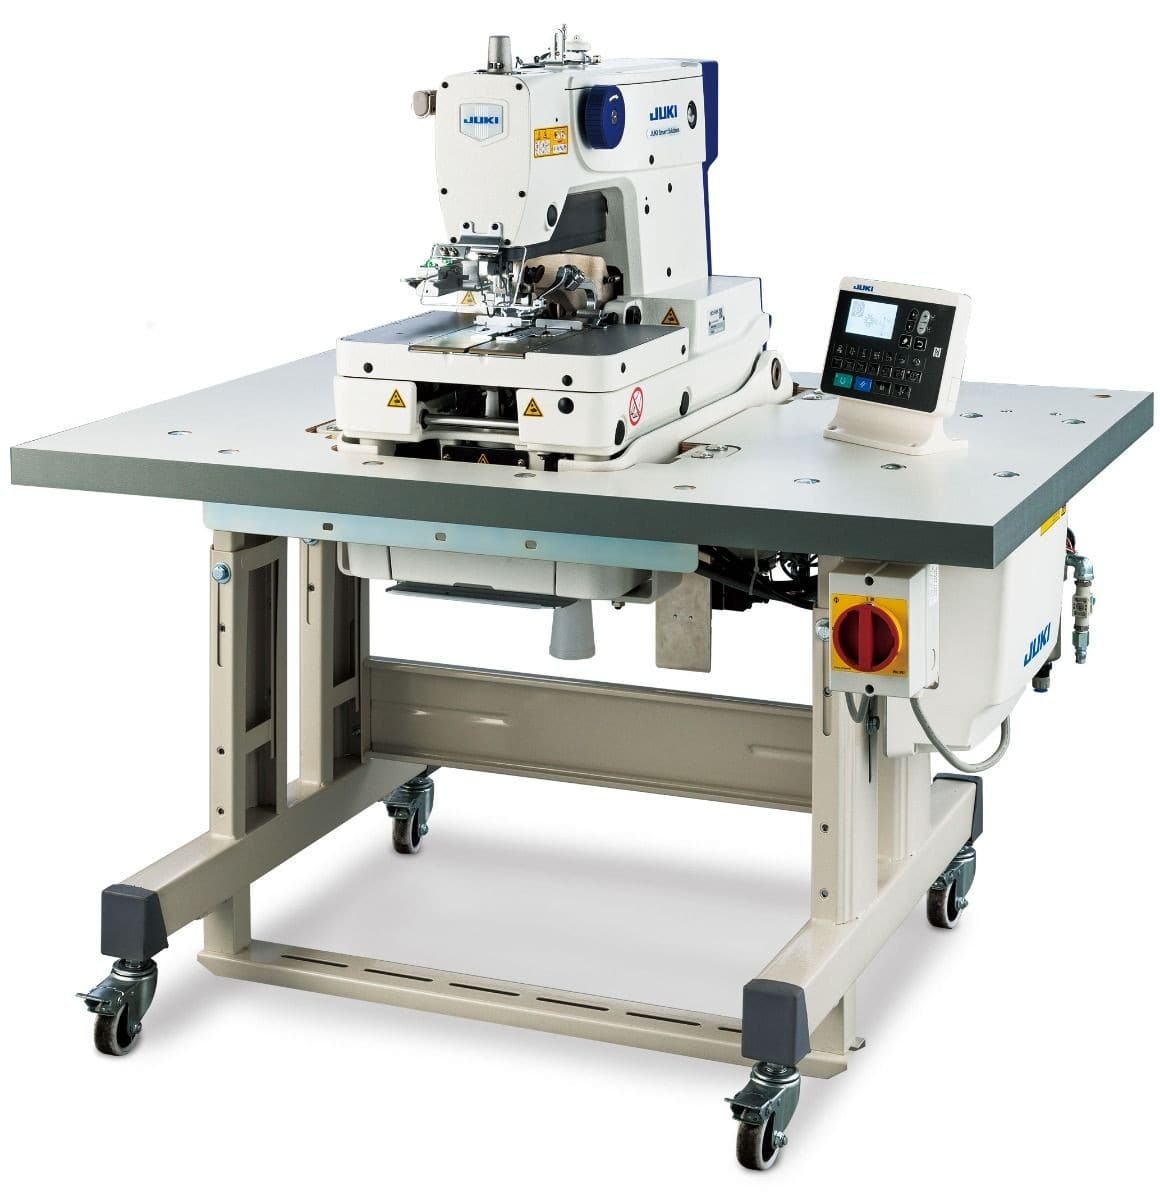 JUKI MEB-3900 Series
Computer-Controlled, Eyelet Buttonholing Sewing System (for jeans and cotton pants)